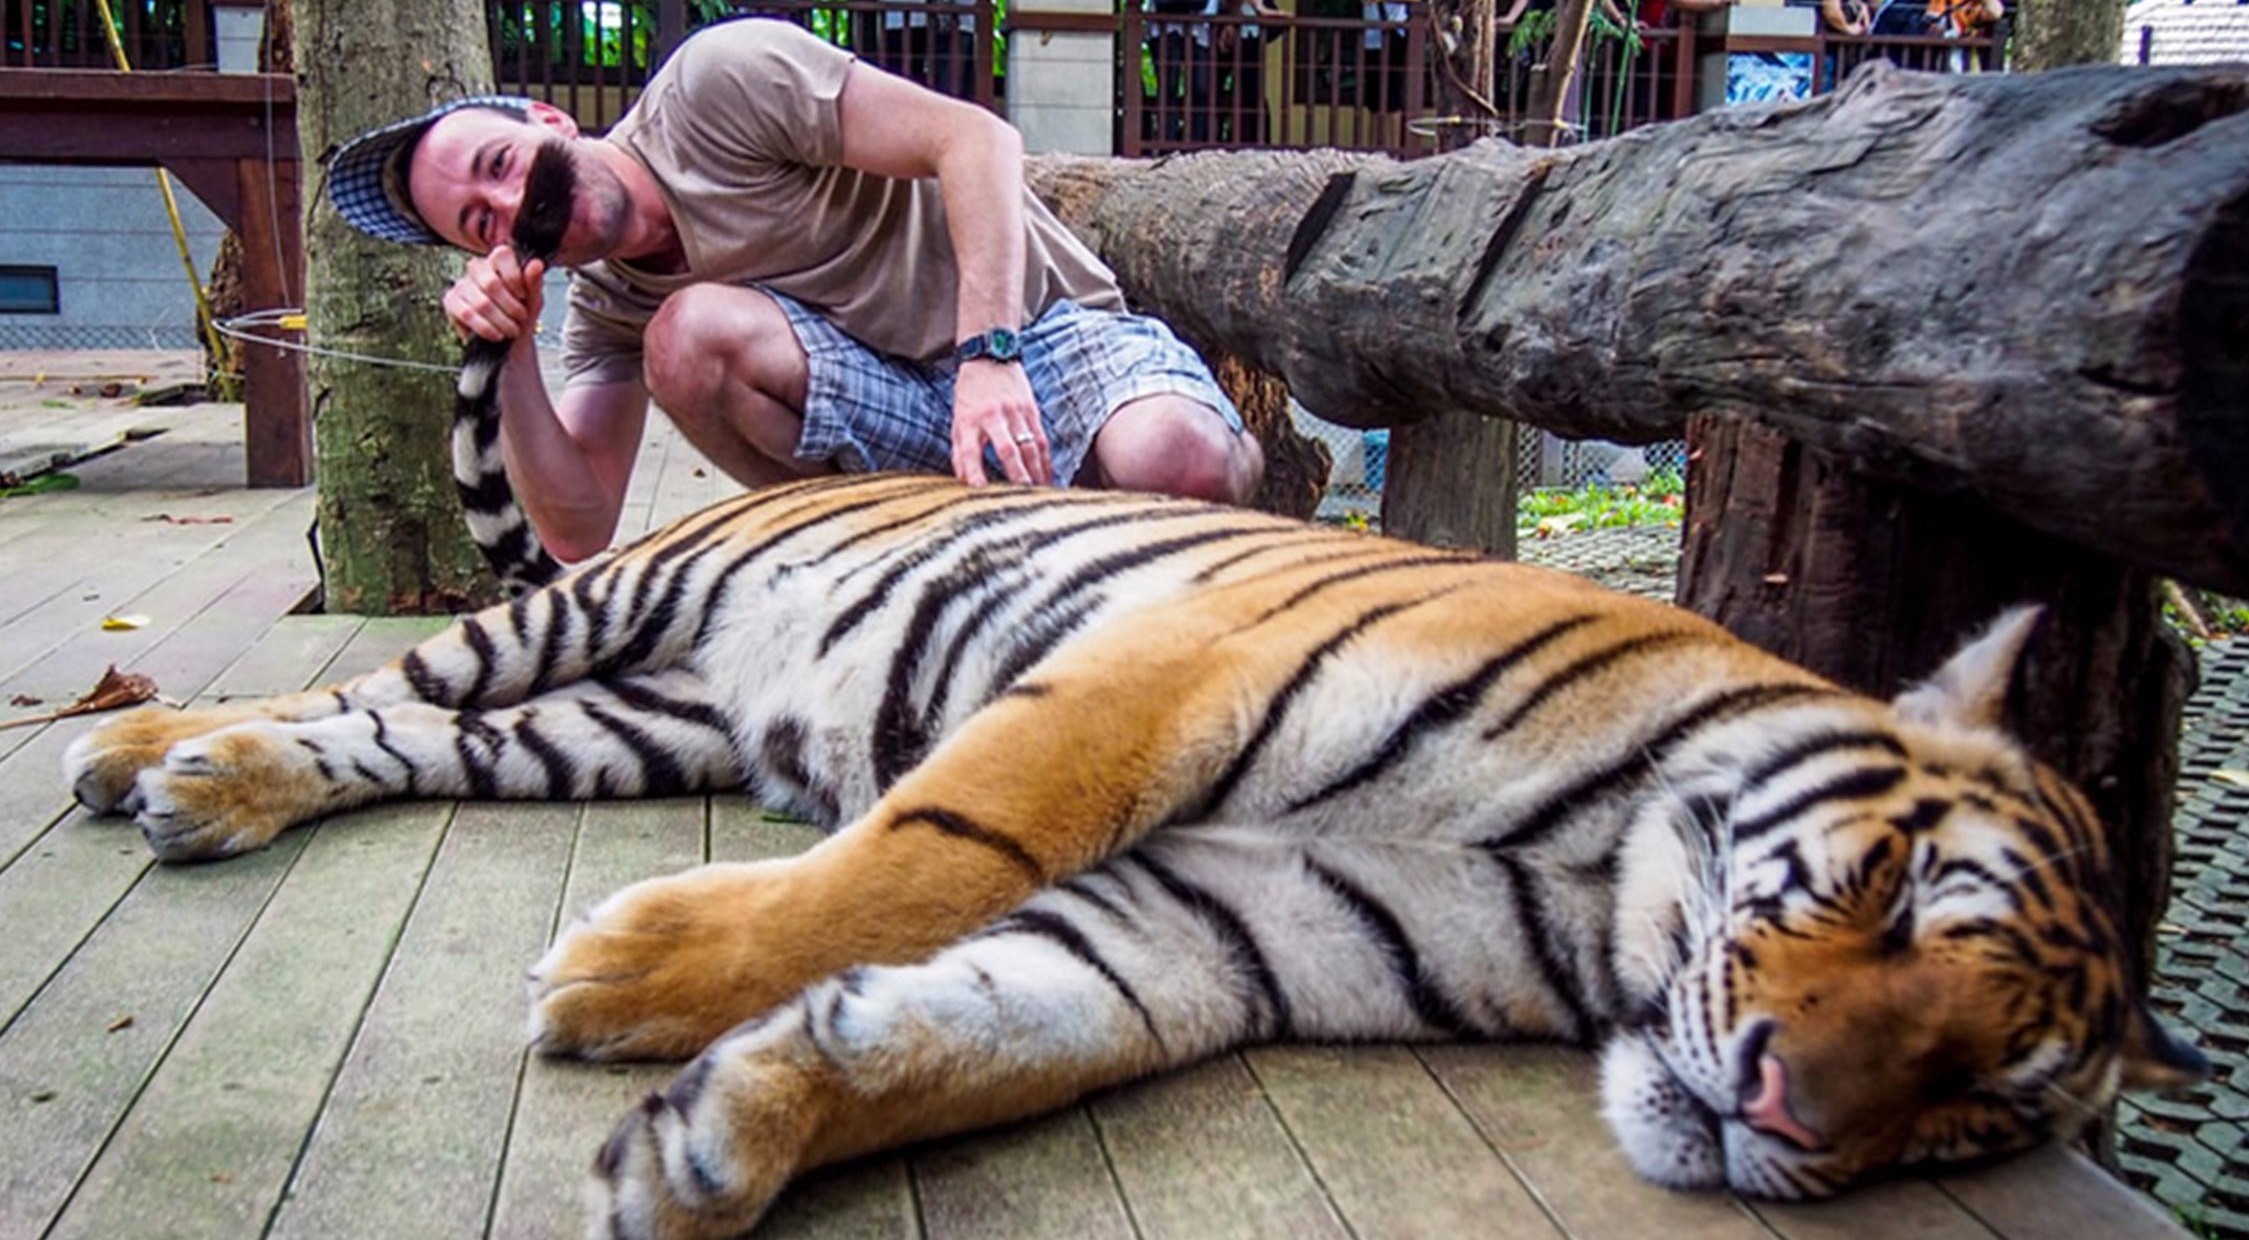 Encountering Majestic Beasts at Thailand's Tiger Kingdom Park